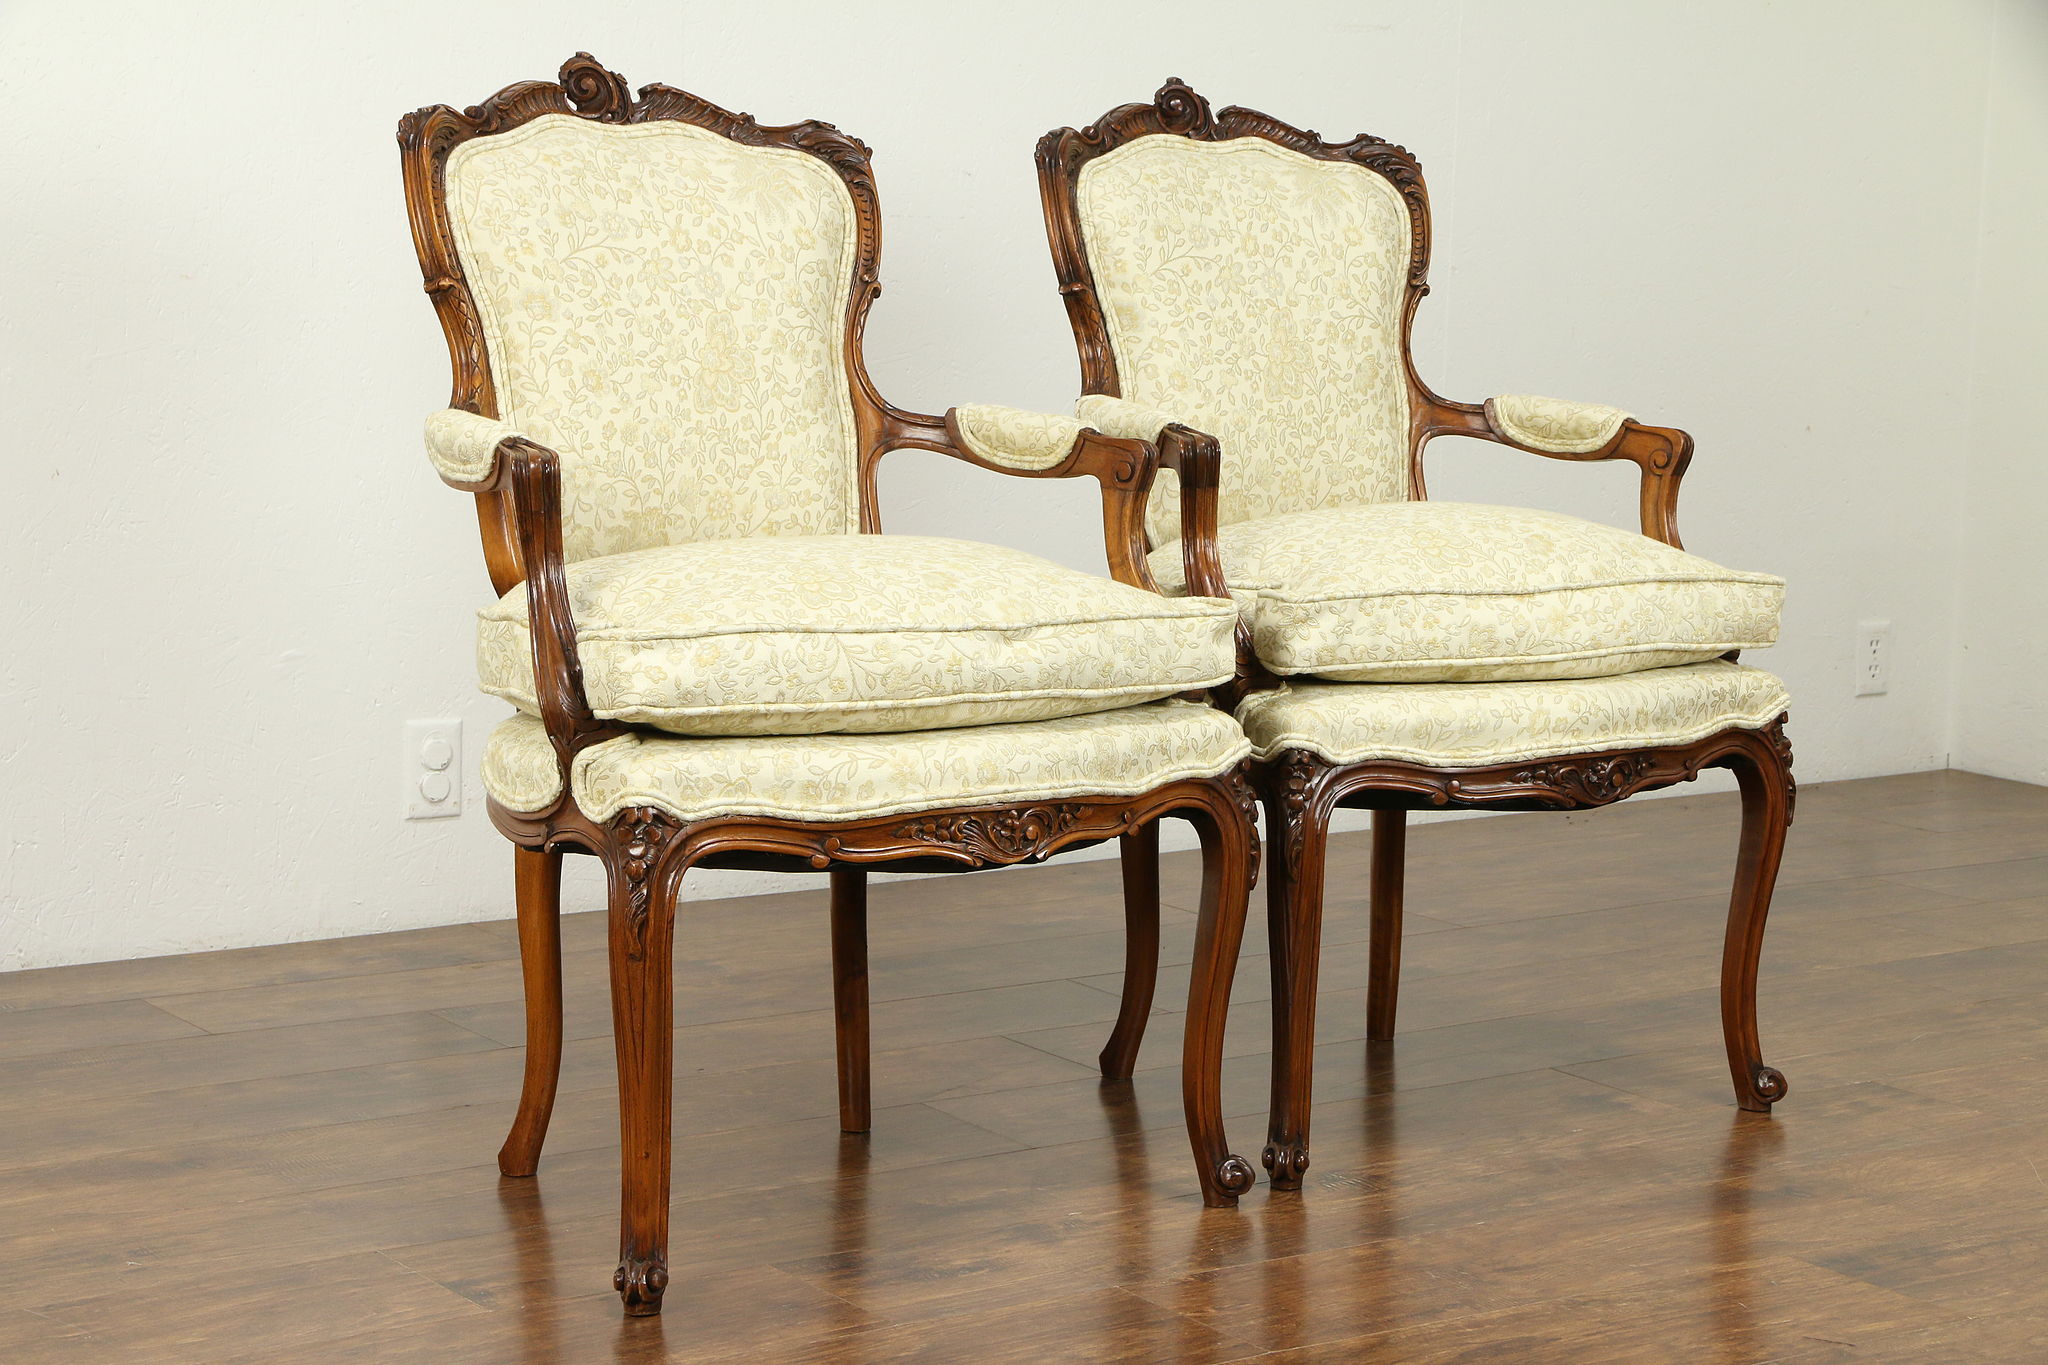 Pair of Antique French Rococo Carved Chairs, New Upholstery, Down